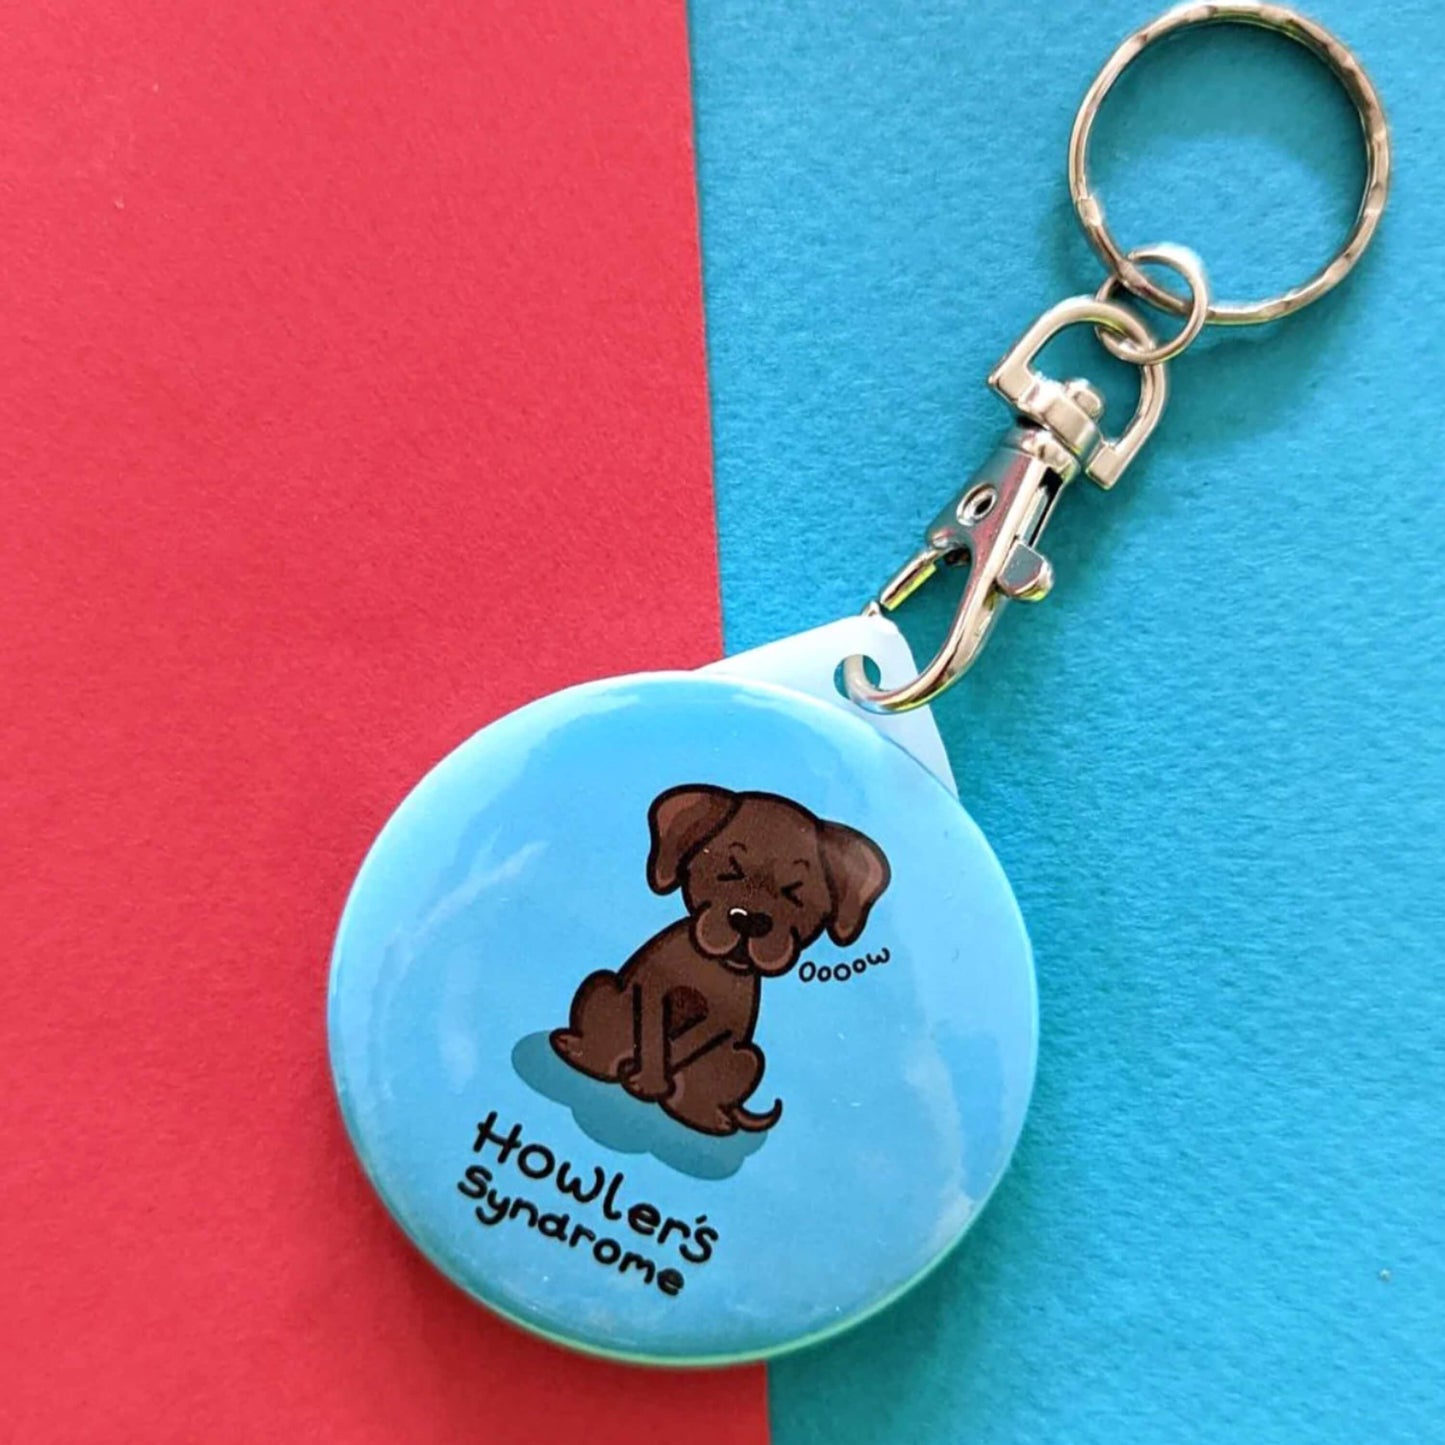 Howlers Syndrome Keyring - Fowlers Syndrome shown on a red and blue background. The circular blue keyring has an illustration of a brown dog with a pained expression and paws over its bladder. 'Howler's Syndrome' is written underneath the dog in black text. The hand drawn design is made to raise awareness for Fowlers Syndrome.